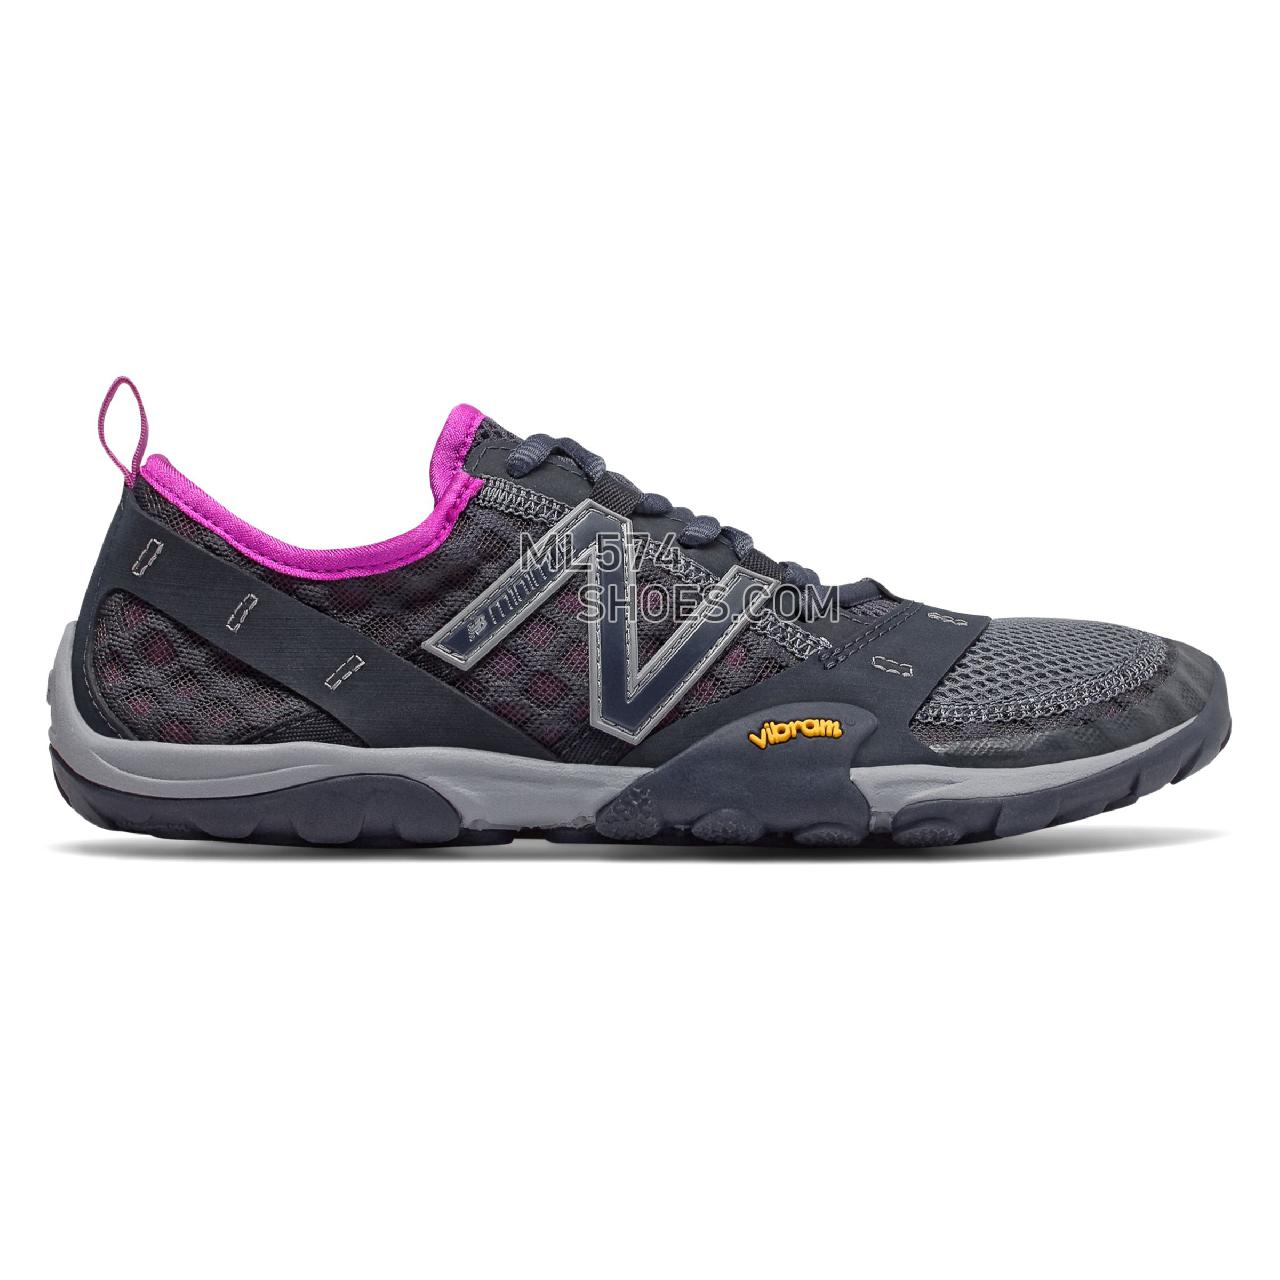 New Balance Minimus Trail 10 - Women's Trail Running - Outerspace with Voltage Violet - WT10VV